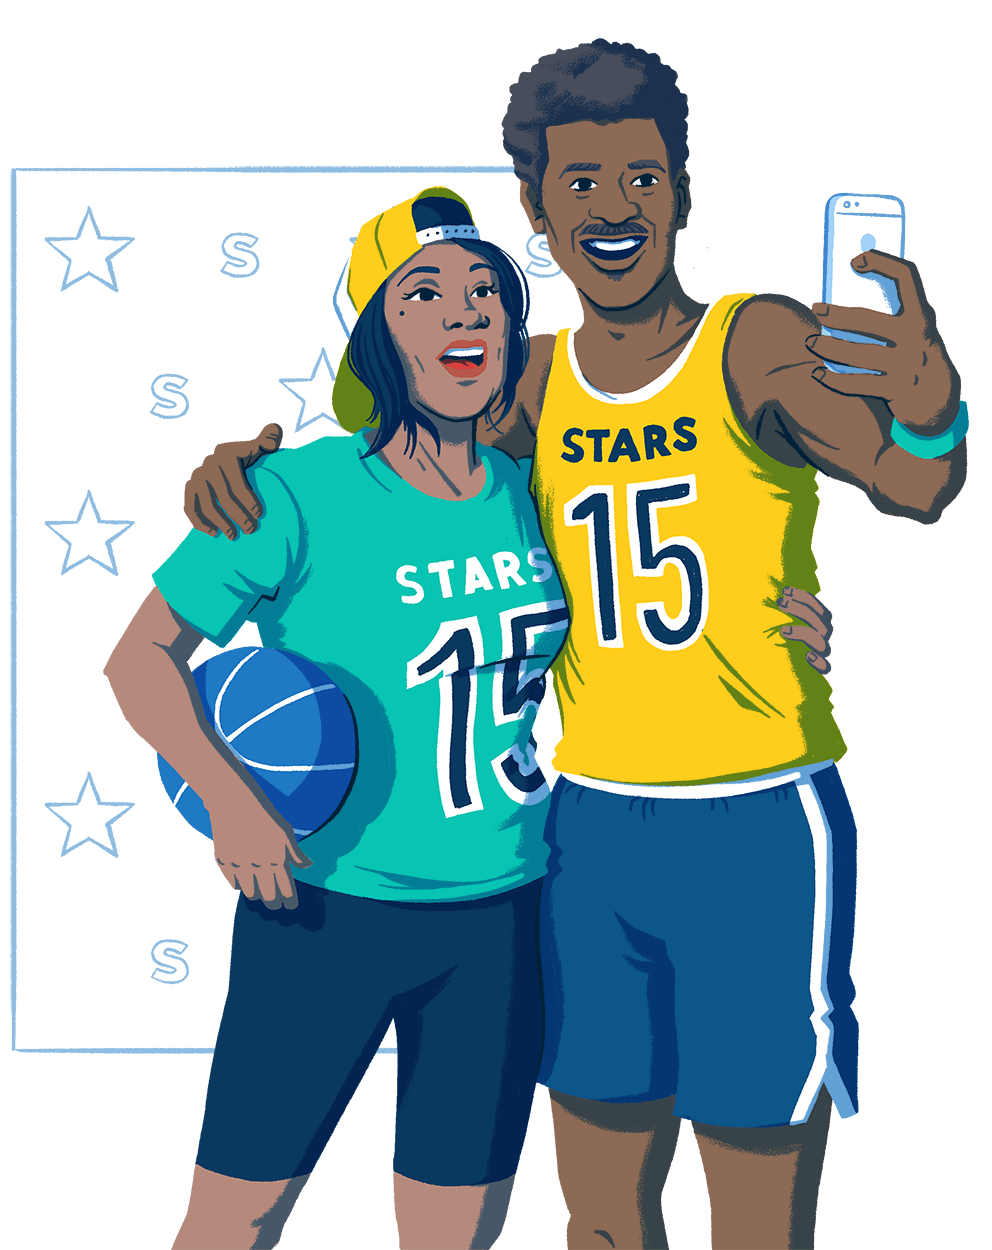 A fan takes a selfie with player on their favorite team